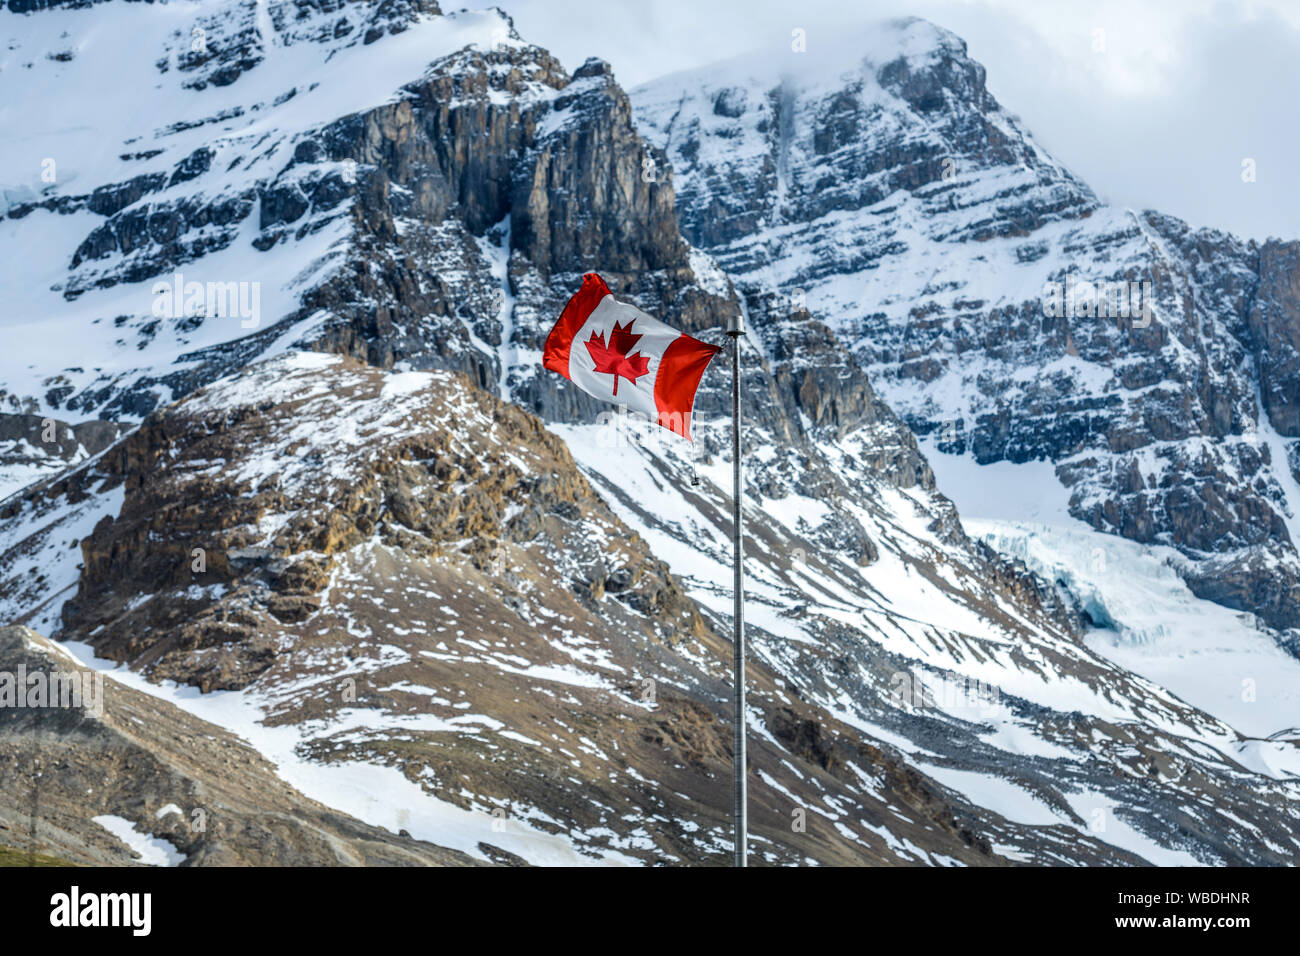 Flag Flying at front of Mt. Andromeda - A Canadian National Flag flying at front of snow-covered Mt. Andromeda and Mt. Athabasca, Jasper National Park. Stock Photo